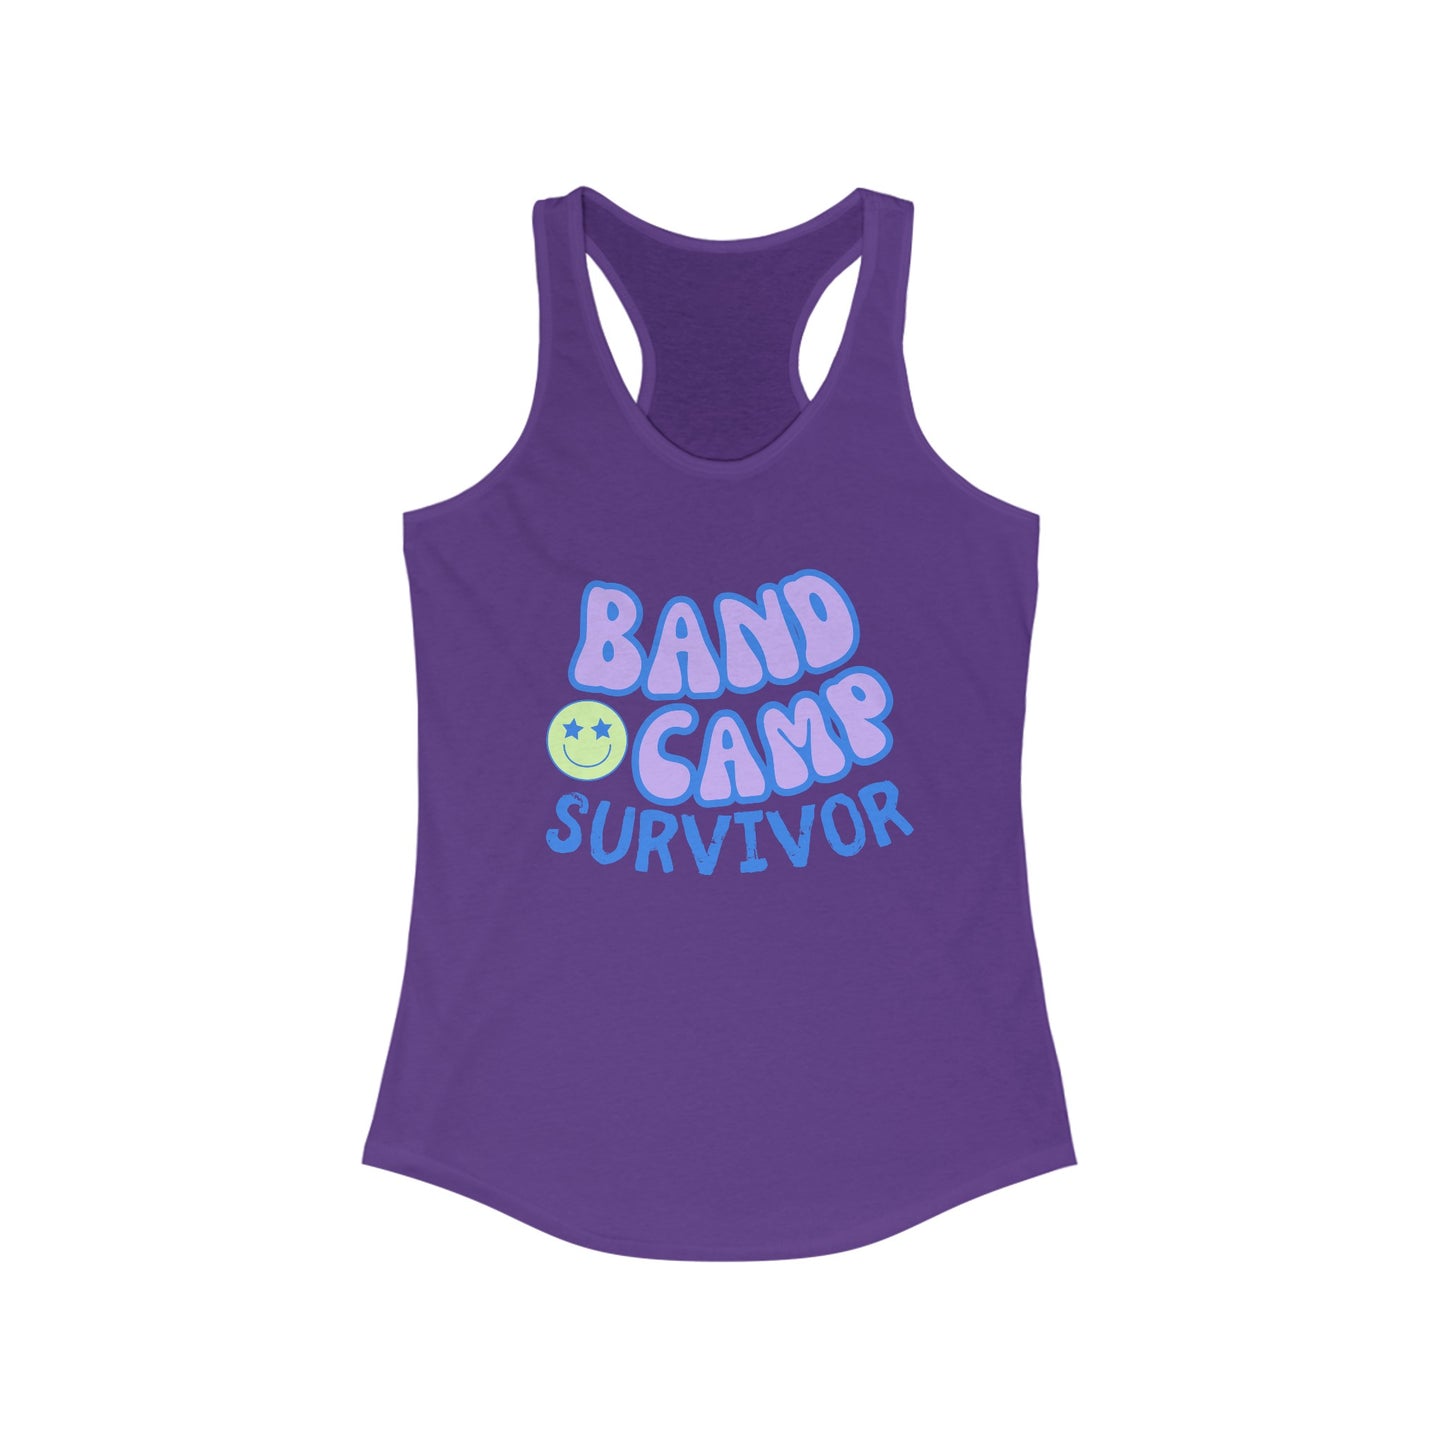 Band Camp Survivor Womens Ideal Racerback Tank, Marching Band Friend Birthday Gift